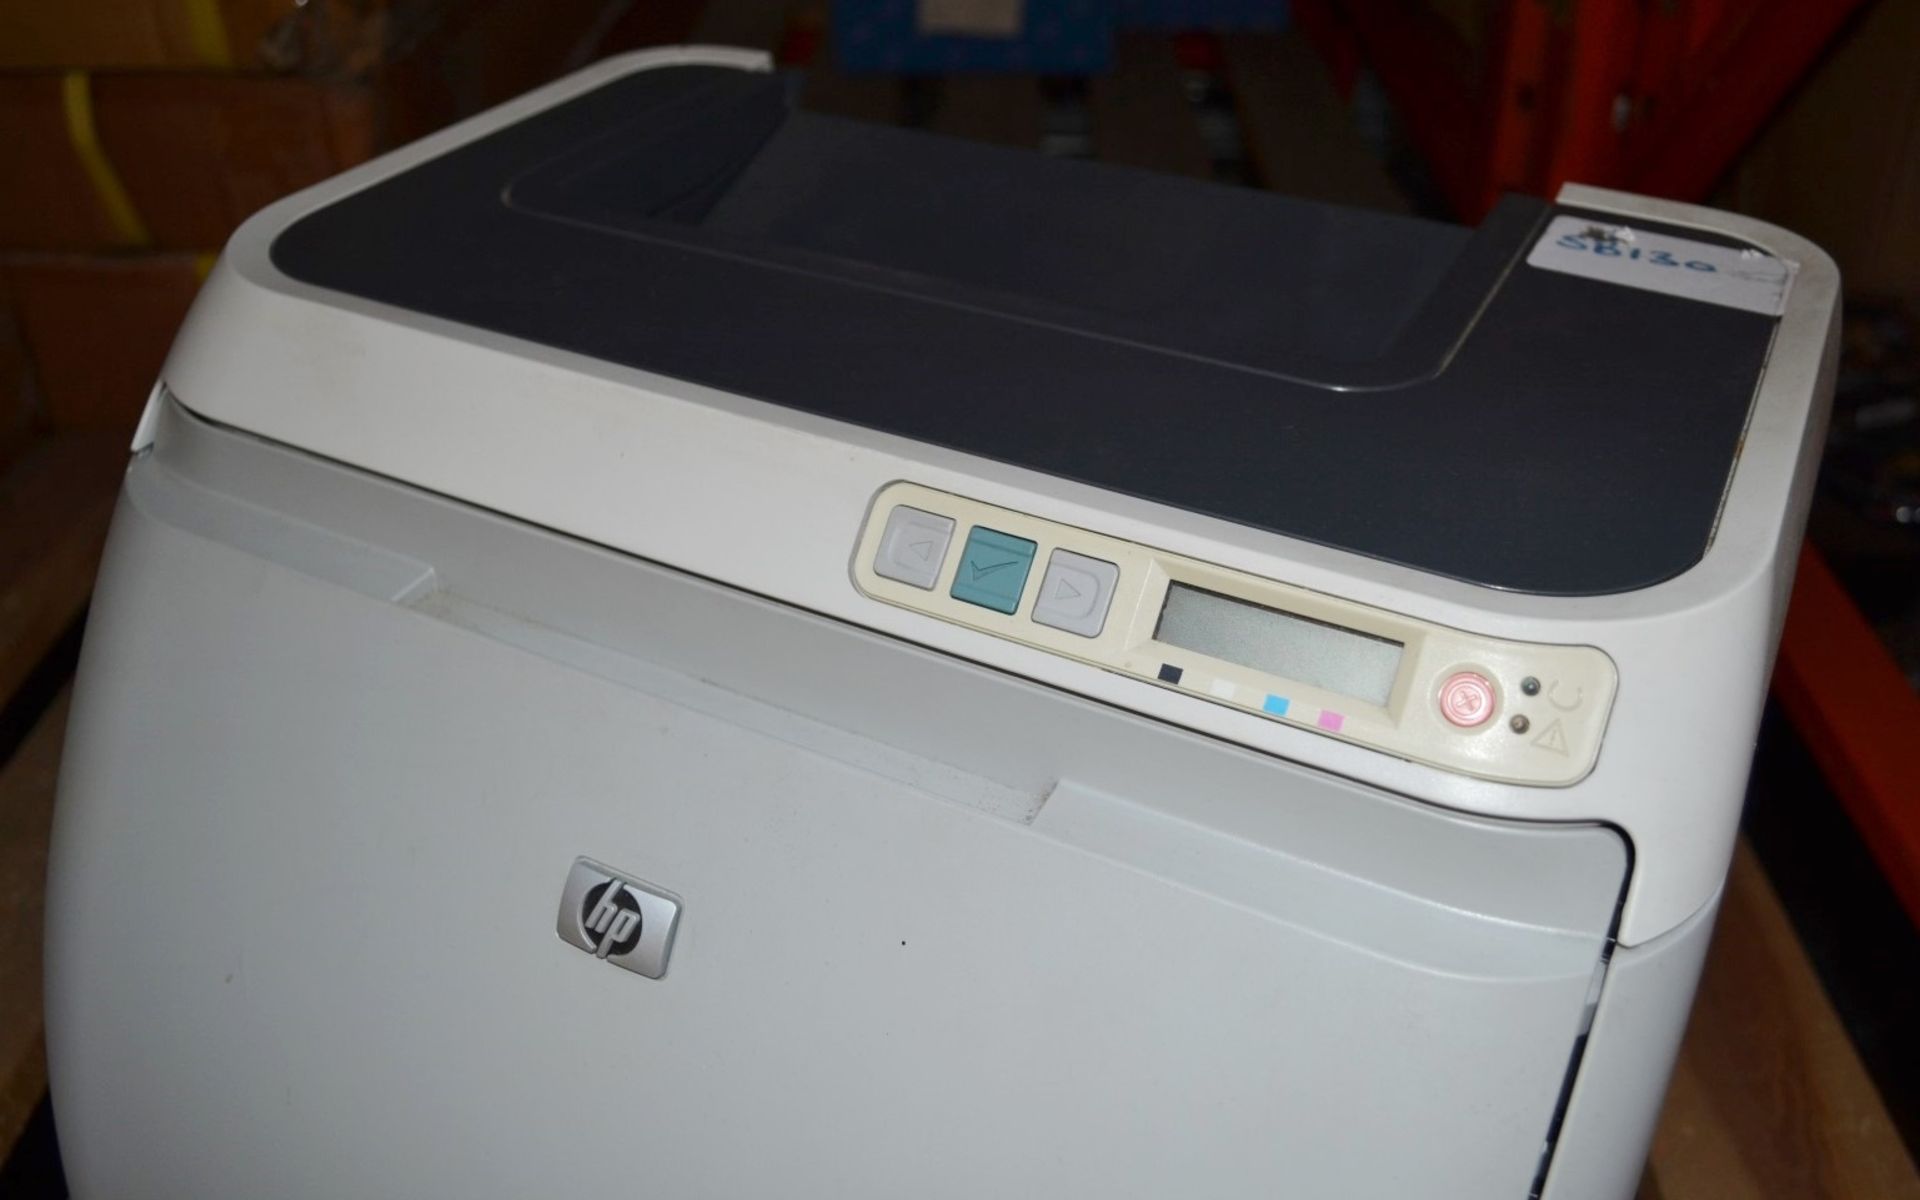 1 x HP Colour Laserjet Printer - Model 2600n - Removed From Office Environment - CL011 - Ref JP006 - - Image 3 of 4